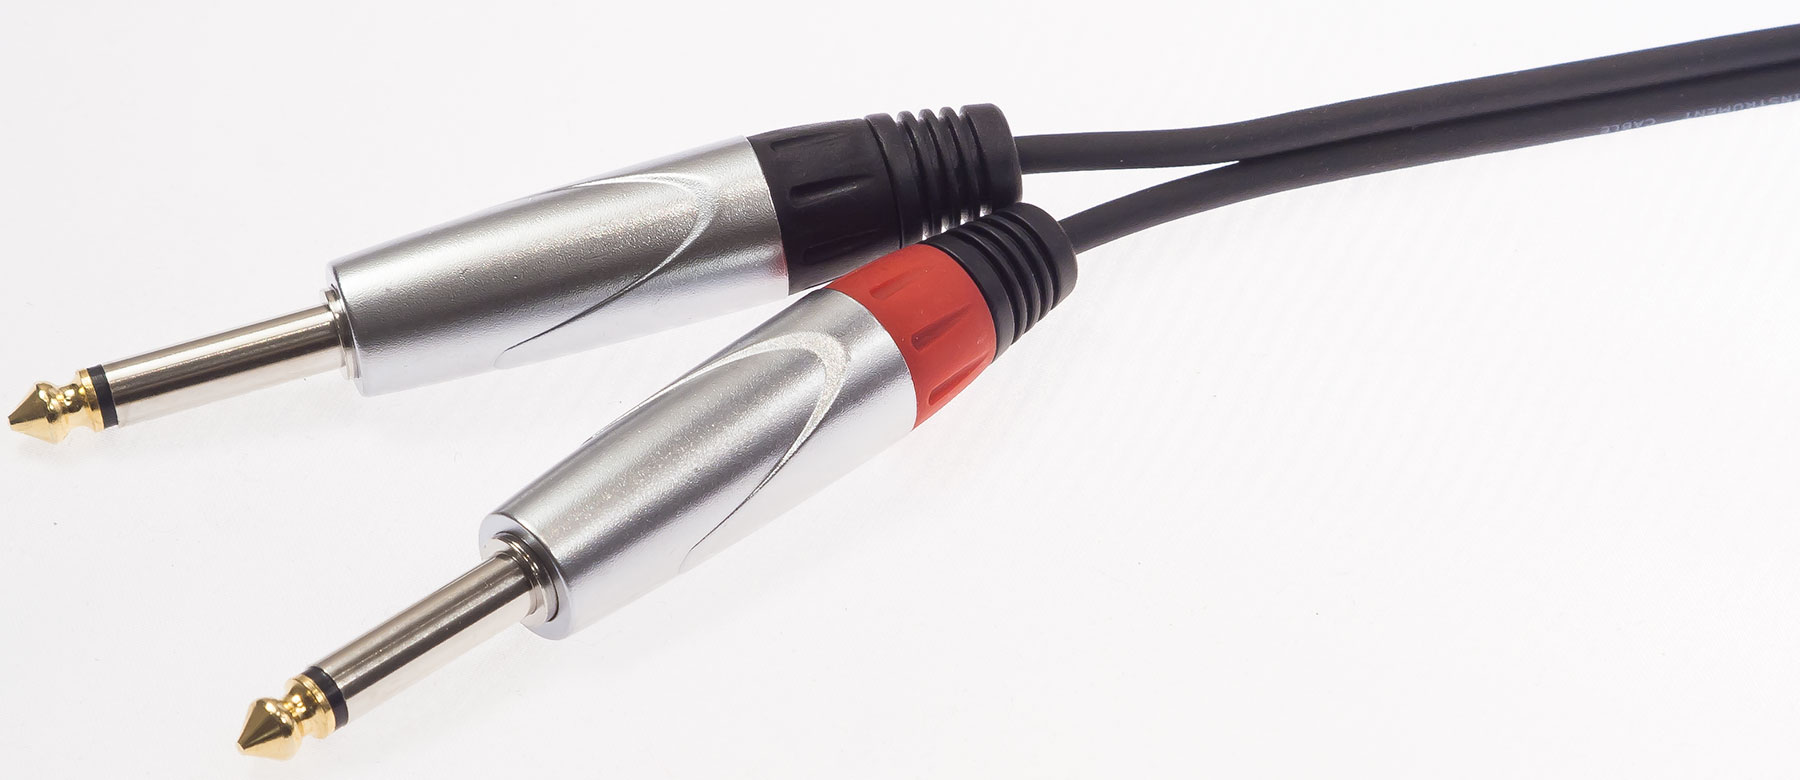 X-tone X2005-1.5m - Jack(m) 3,5 Stereo / 2 Jack(m) 6,35 Mono Silver Series - Cable - Variation 3